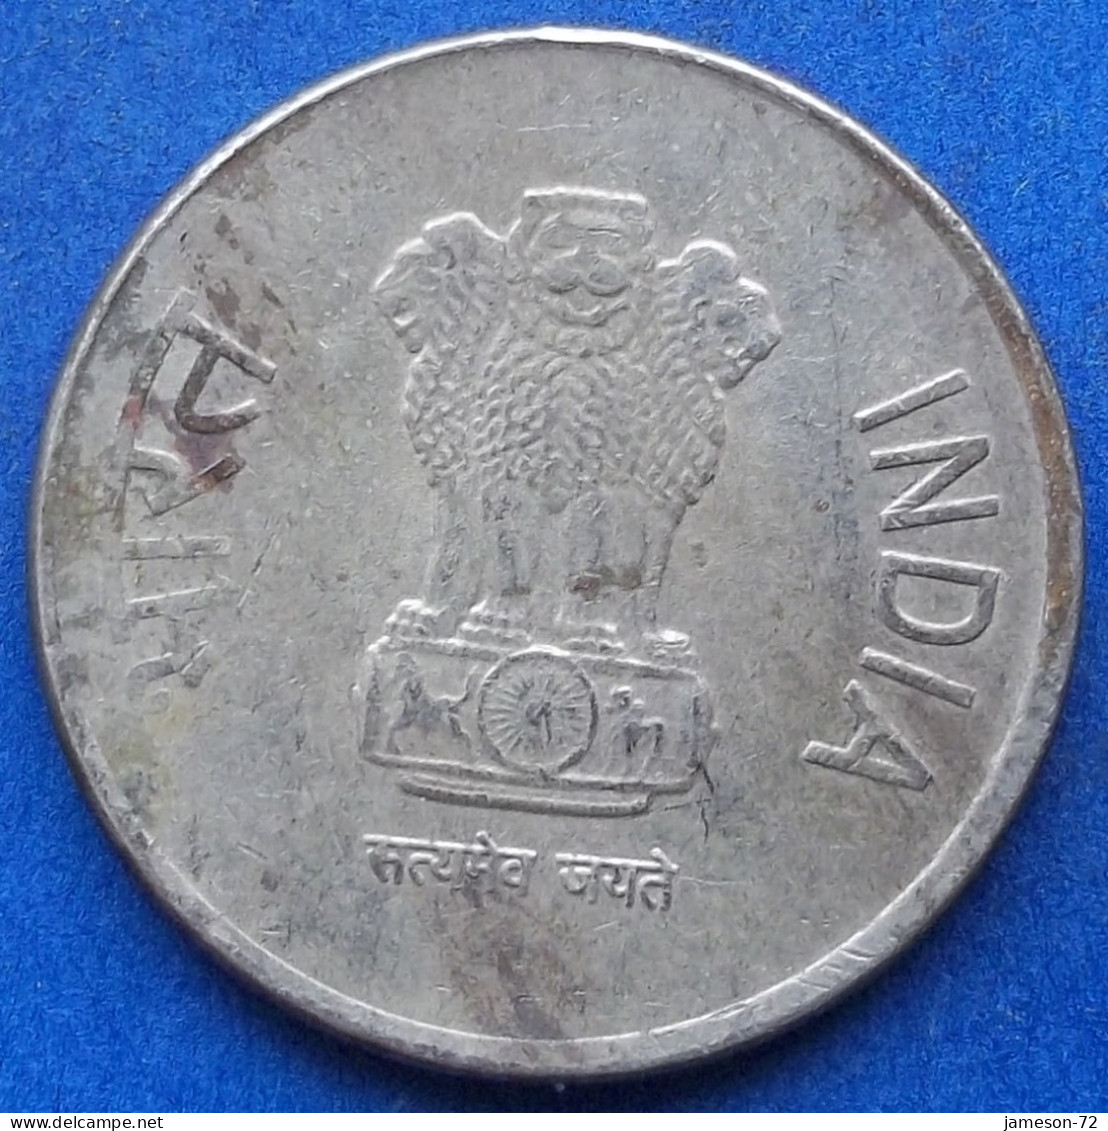 INDIA - 5 Rupees 2017 "Lotus Flowers" KM# 399.1 Republic Decimal Coinage (1957) - Edelweiss Coins - Georgien